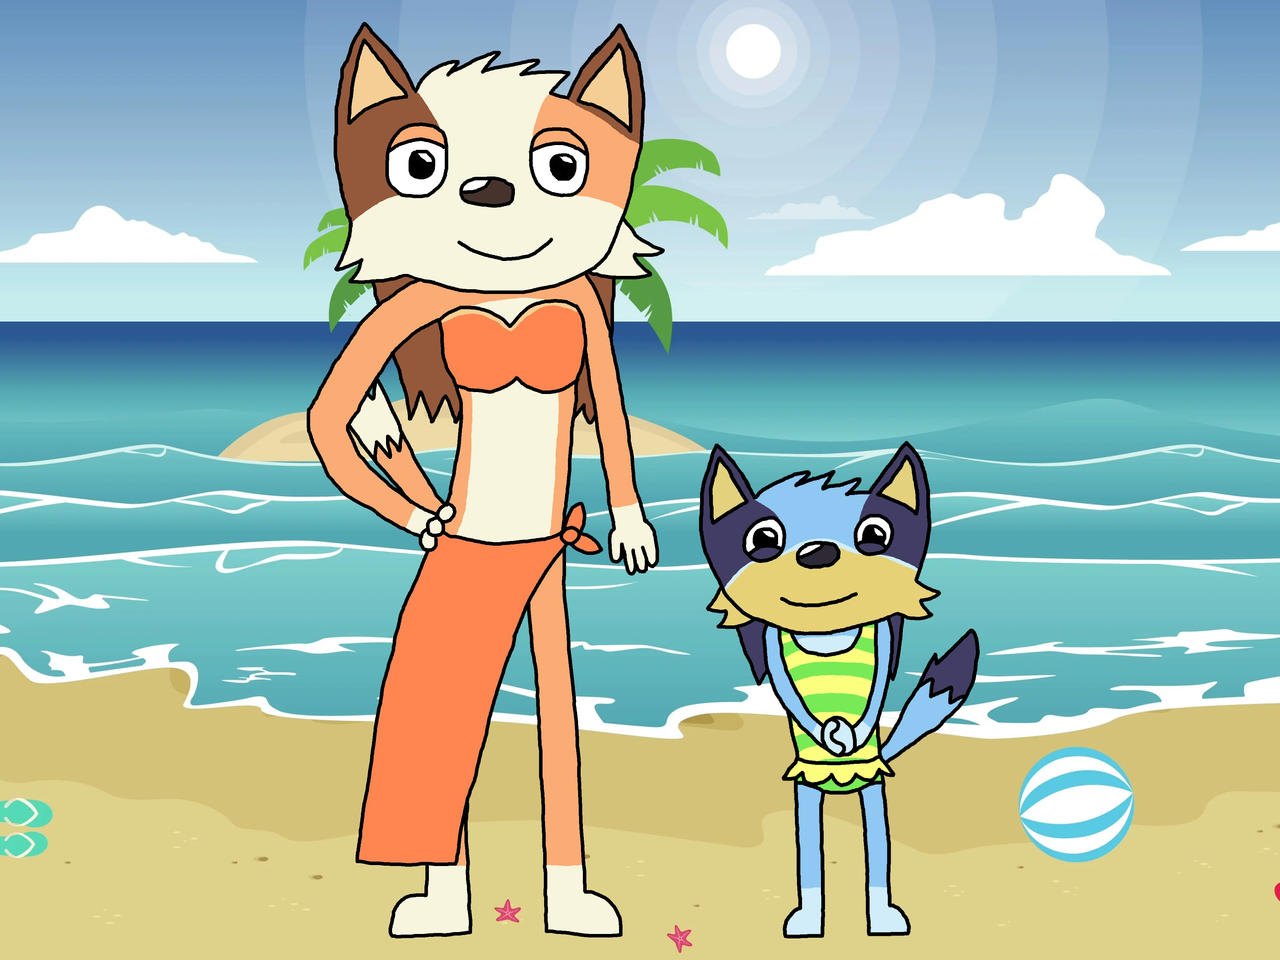 Wolfoo and Lucy in their Swimwear by Miguel130509 on DeviantArt